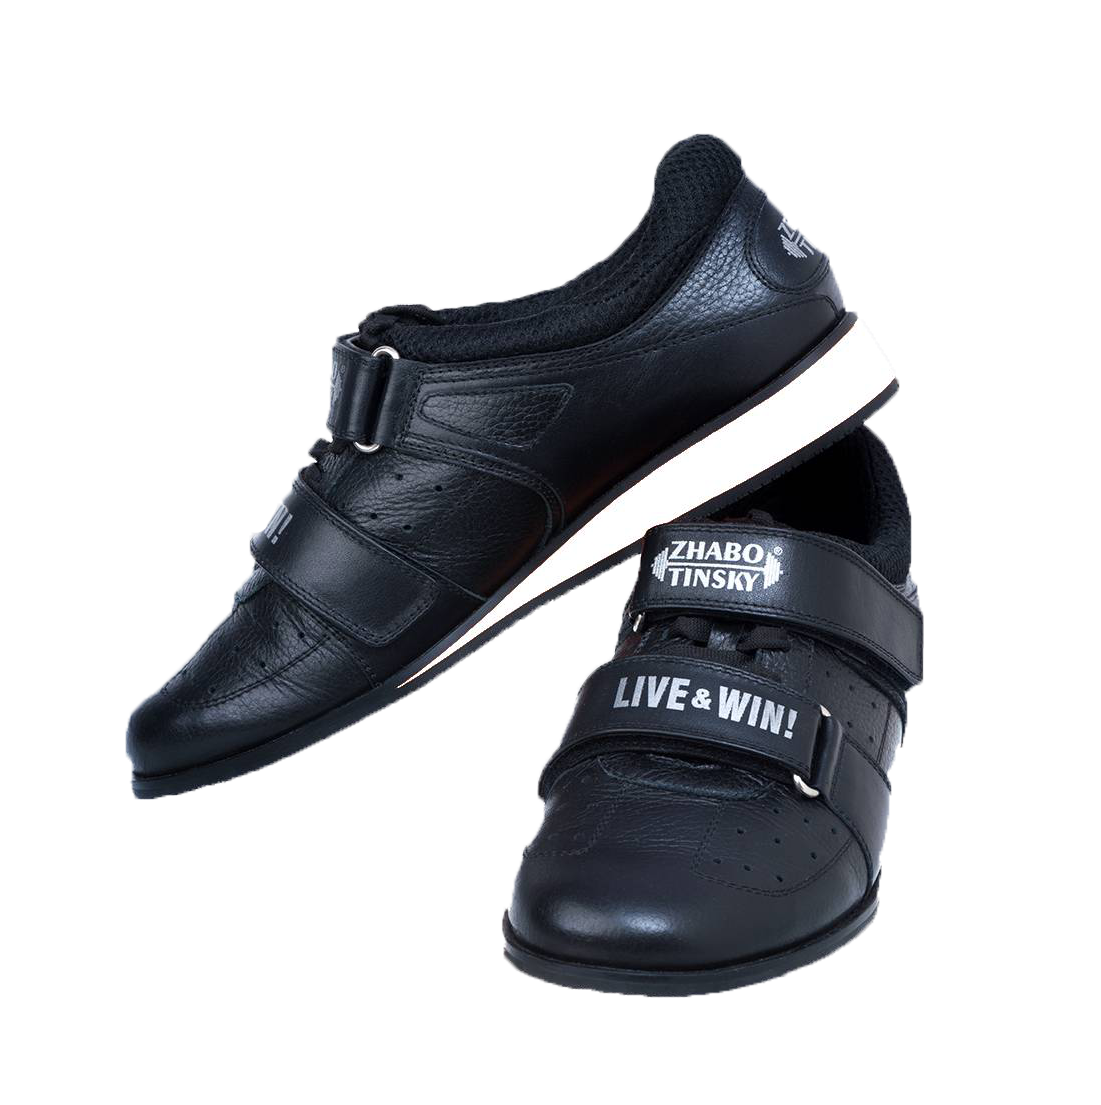 Weightlifting shoes Live&Win , black, 42 size (UKR)